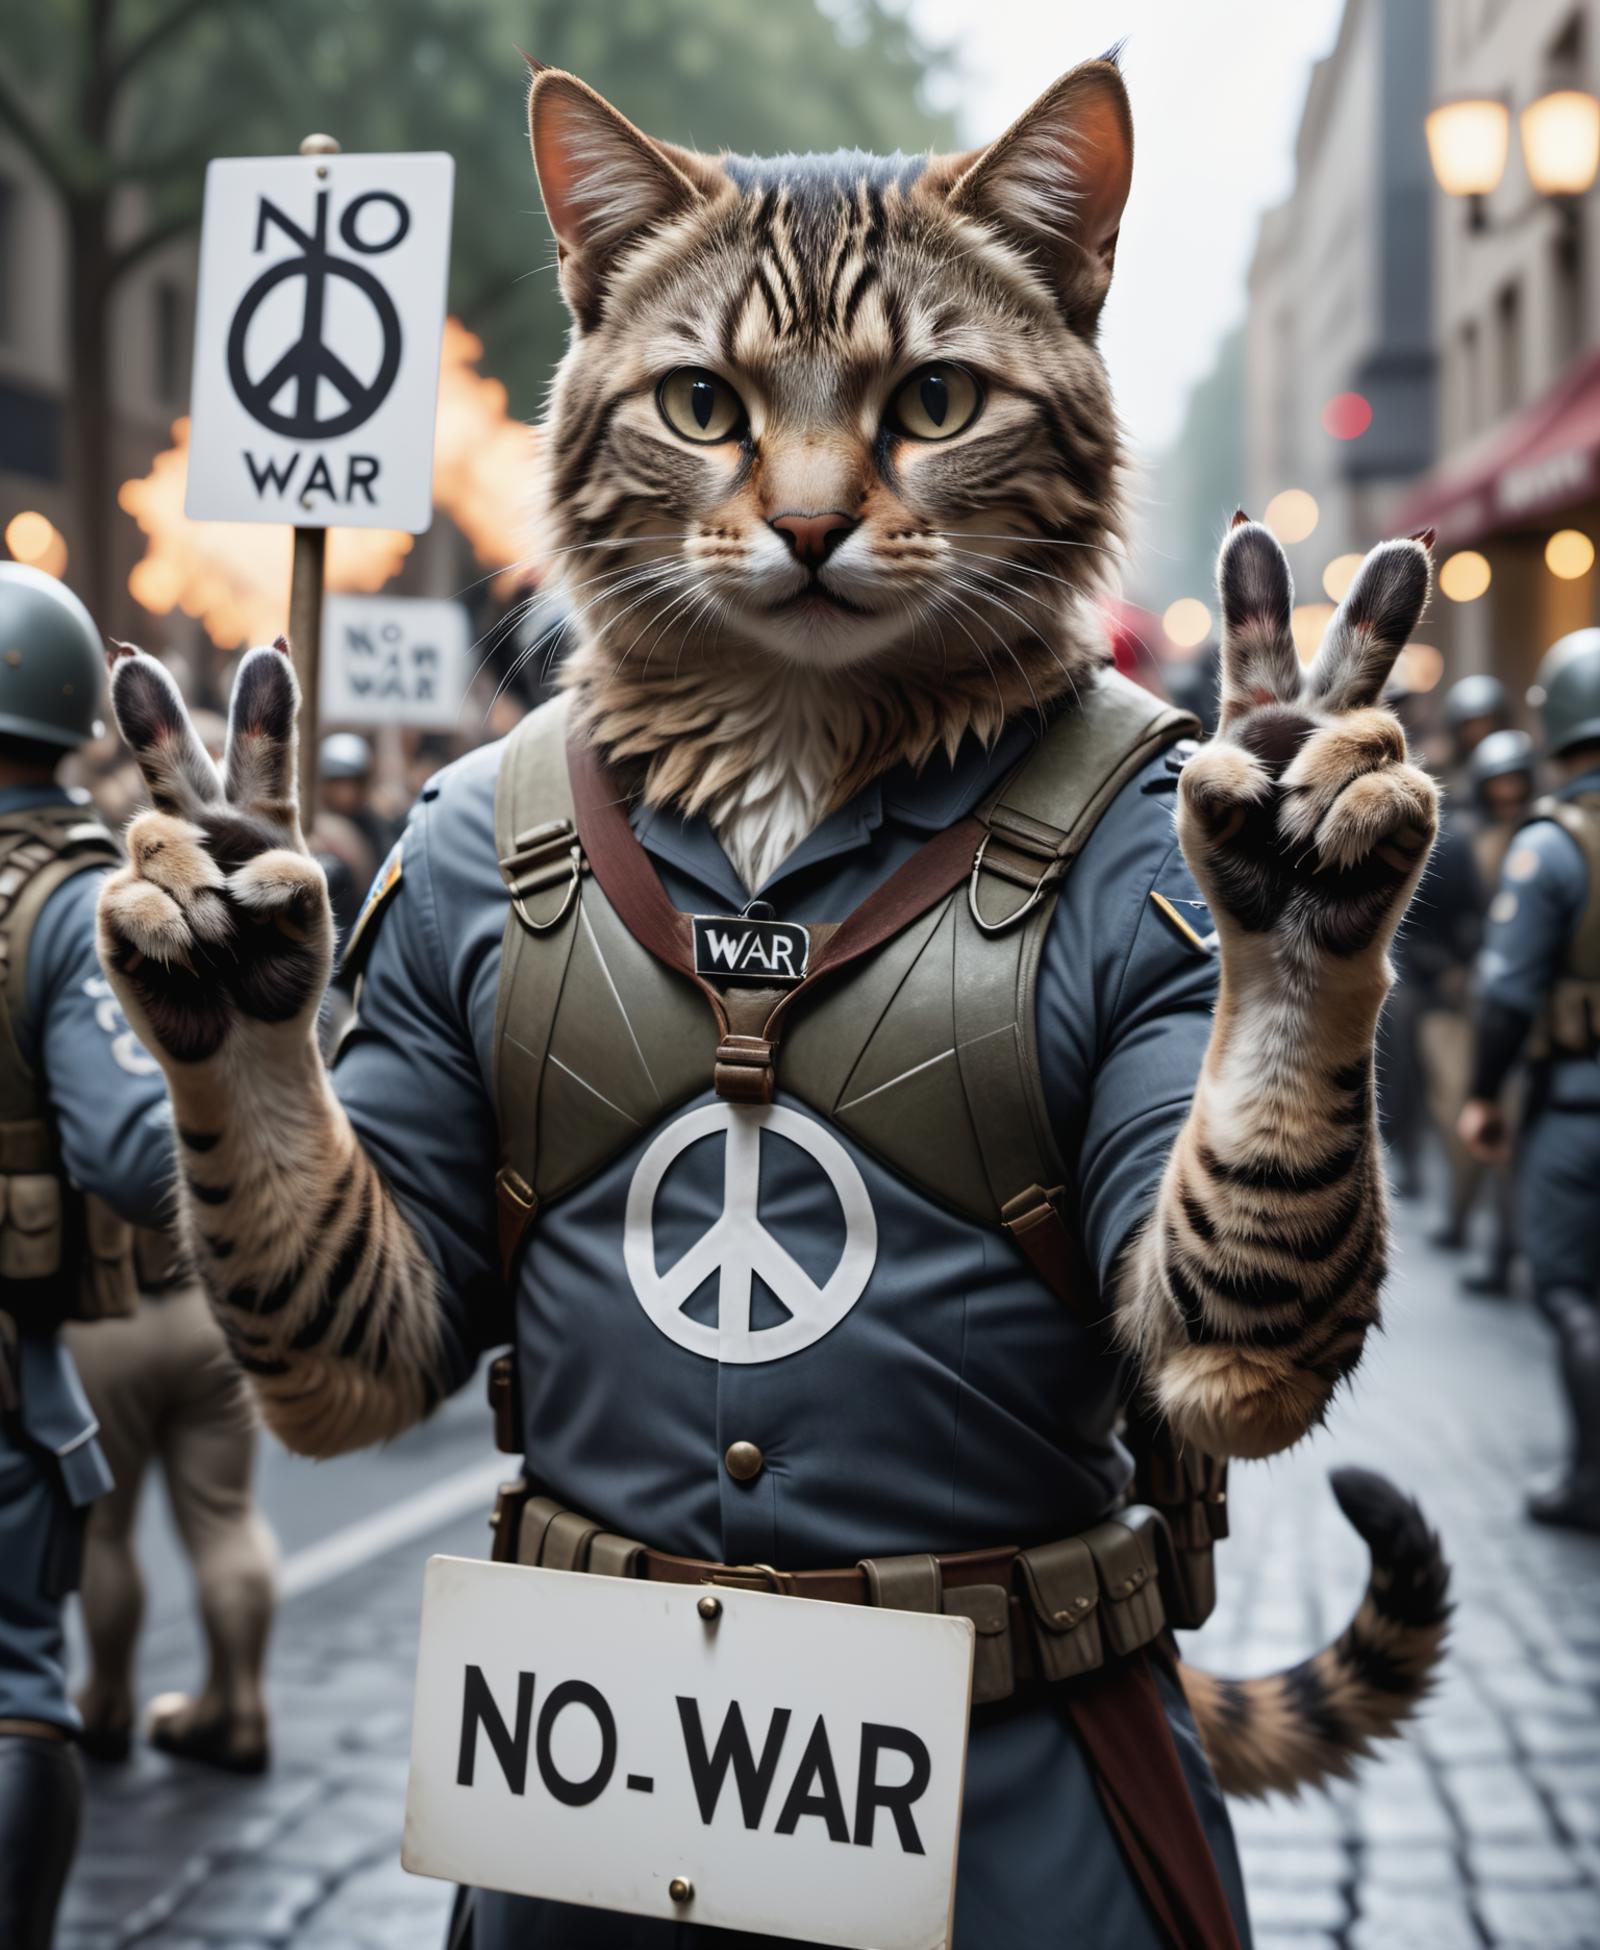 A protester dressed as a cat holds a sign that says "no war."